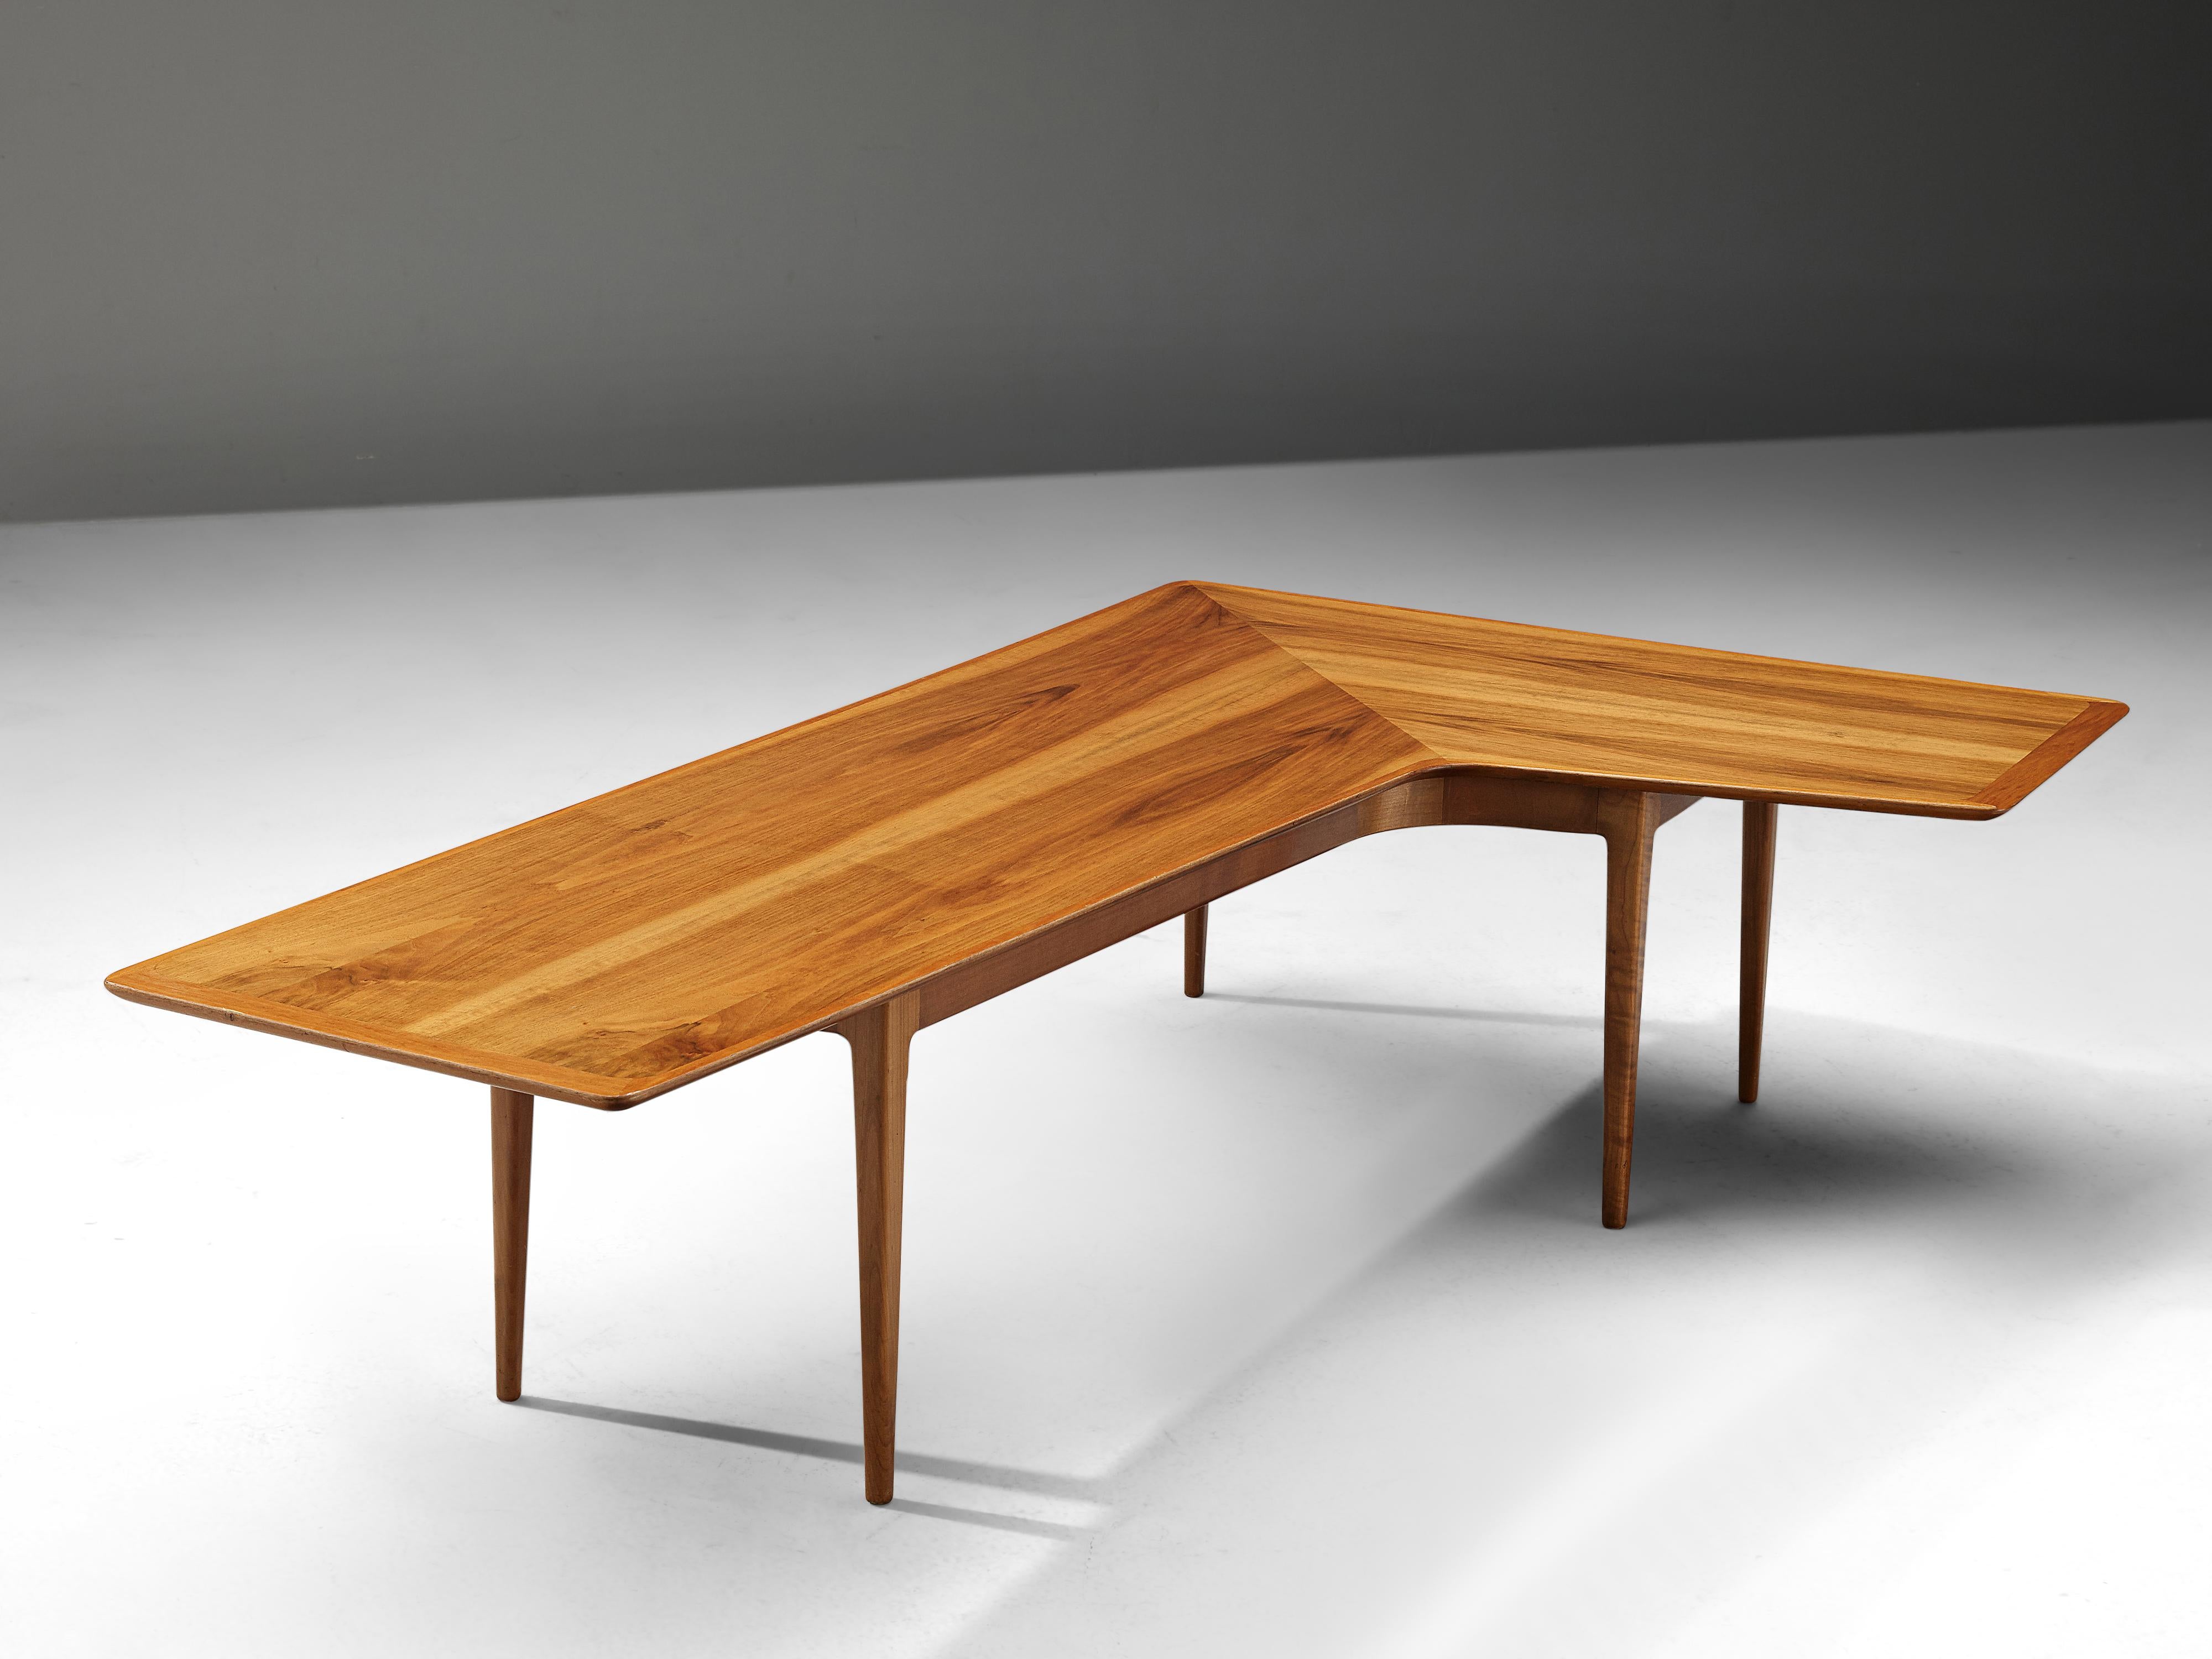 Angular coffee table, walnut, Denmark, 1960s

This Danish angular coffee table is made of walnut wood in a warm color with beautiful natural grain which highlights the tabletop. Striking is the shape of the tabletop. Like an angular boomerang the